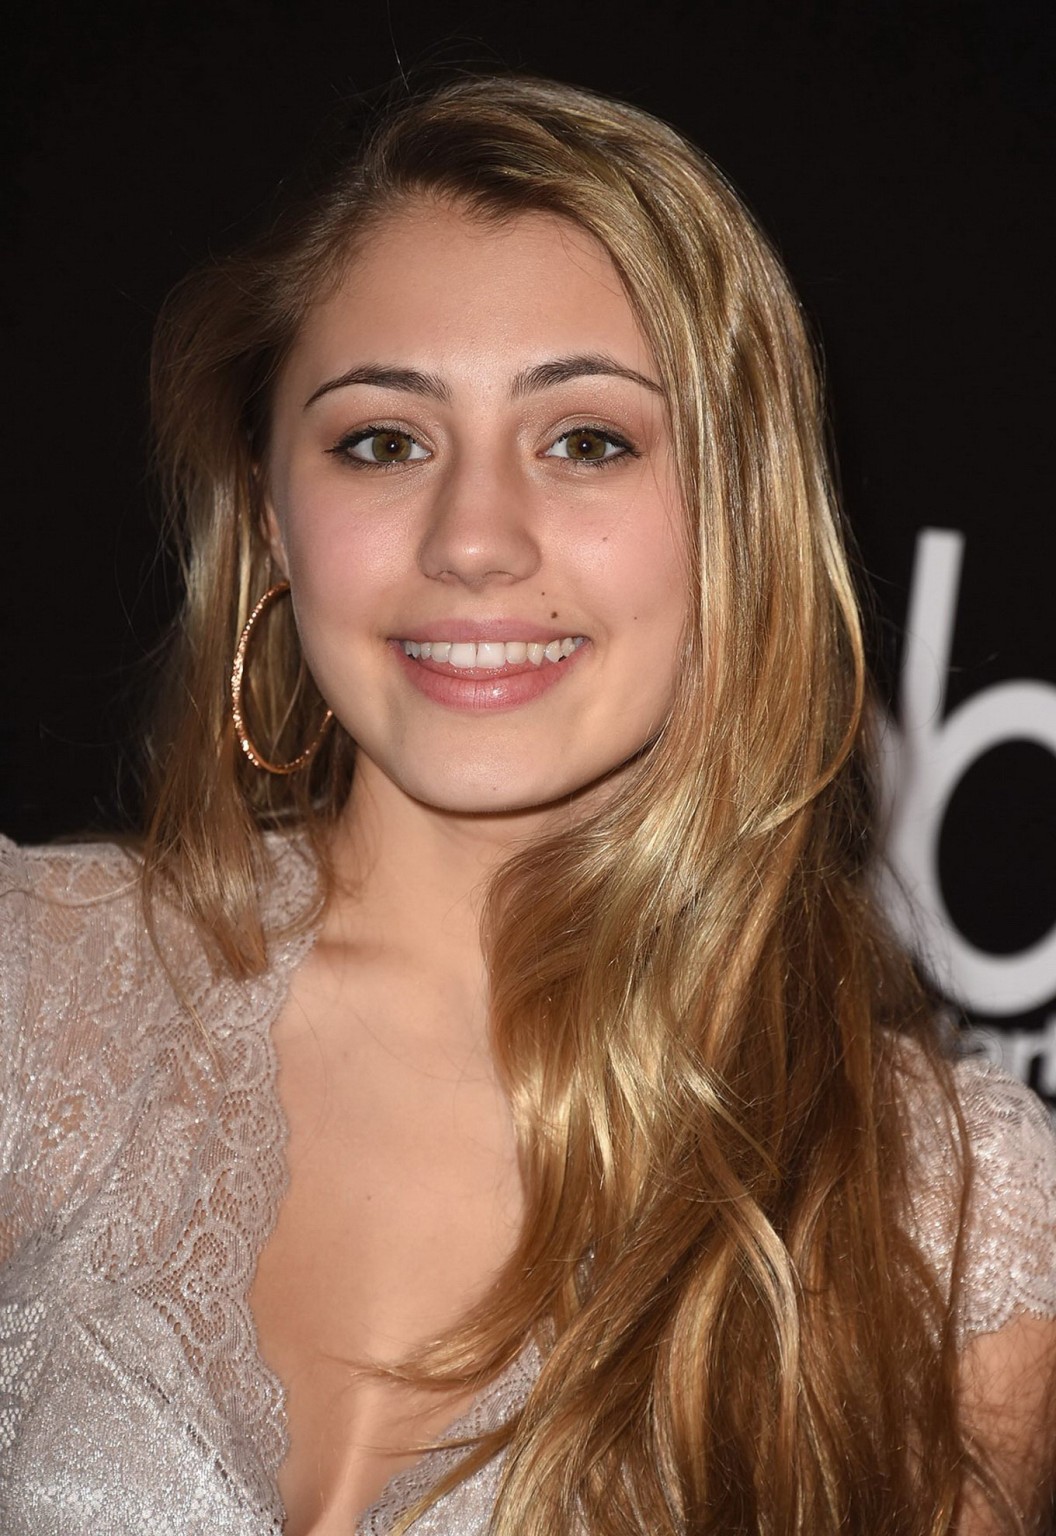 Lia Marie Johnson cleavy and leggy at The People Magazine Awards in Beverly Hill #75177987